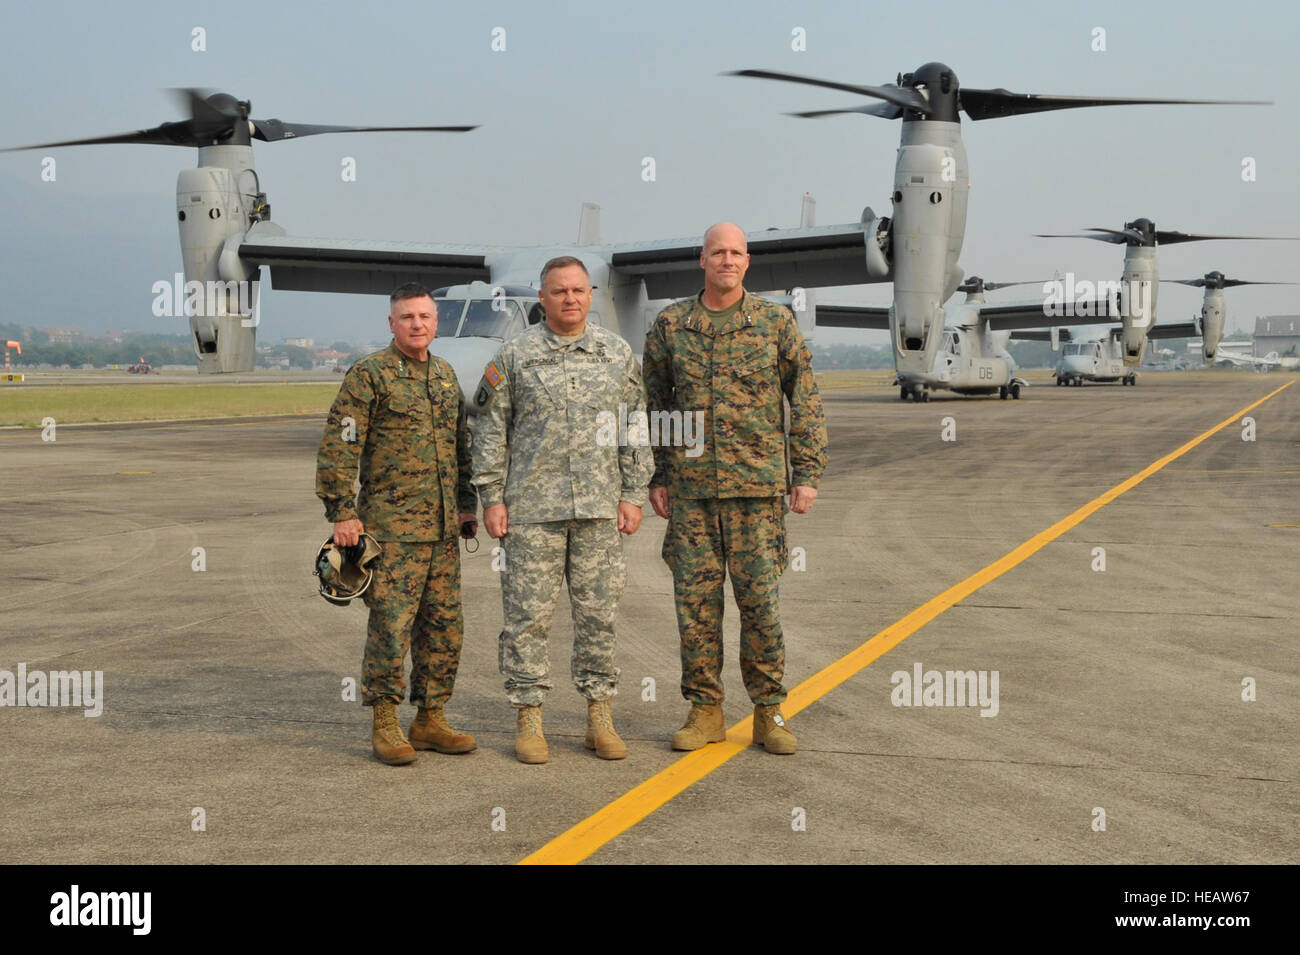 From left to right: U.S. Marine Lt. Gen. Terry Robling, U.S. Army Lt. Gen. Francis Wiercinski and U.S. Marine Maj. Gen. Christopher Owens pose in front of three U.S. Marine Corps MV-22B Ospreys Feb. 21 prior to boarding the aircraft at Wing 41 Royal Thai Air Force Base in Chiang Mai province, Kingdom of Thailand. The aircraft transported  the general officers to Ban Dan Lan Hoi, Sukothai province, to attend a combined arms live-fire exercise, the culminating event of exercise Cobra Gold 2013. As the largest multinational exercise in the Asia-Pacific region, CG 13 has demonstrated the commitmen Stock Photo